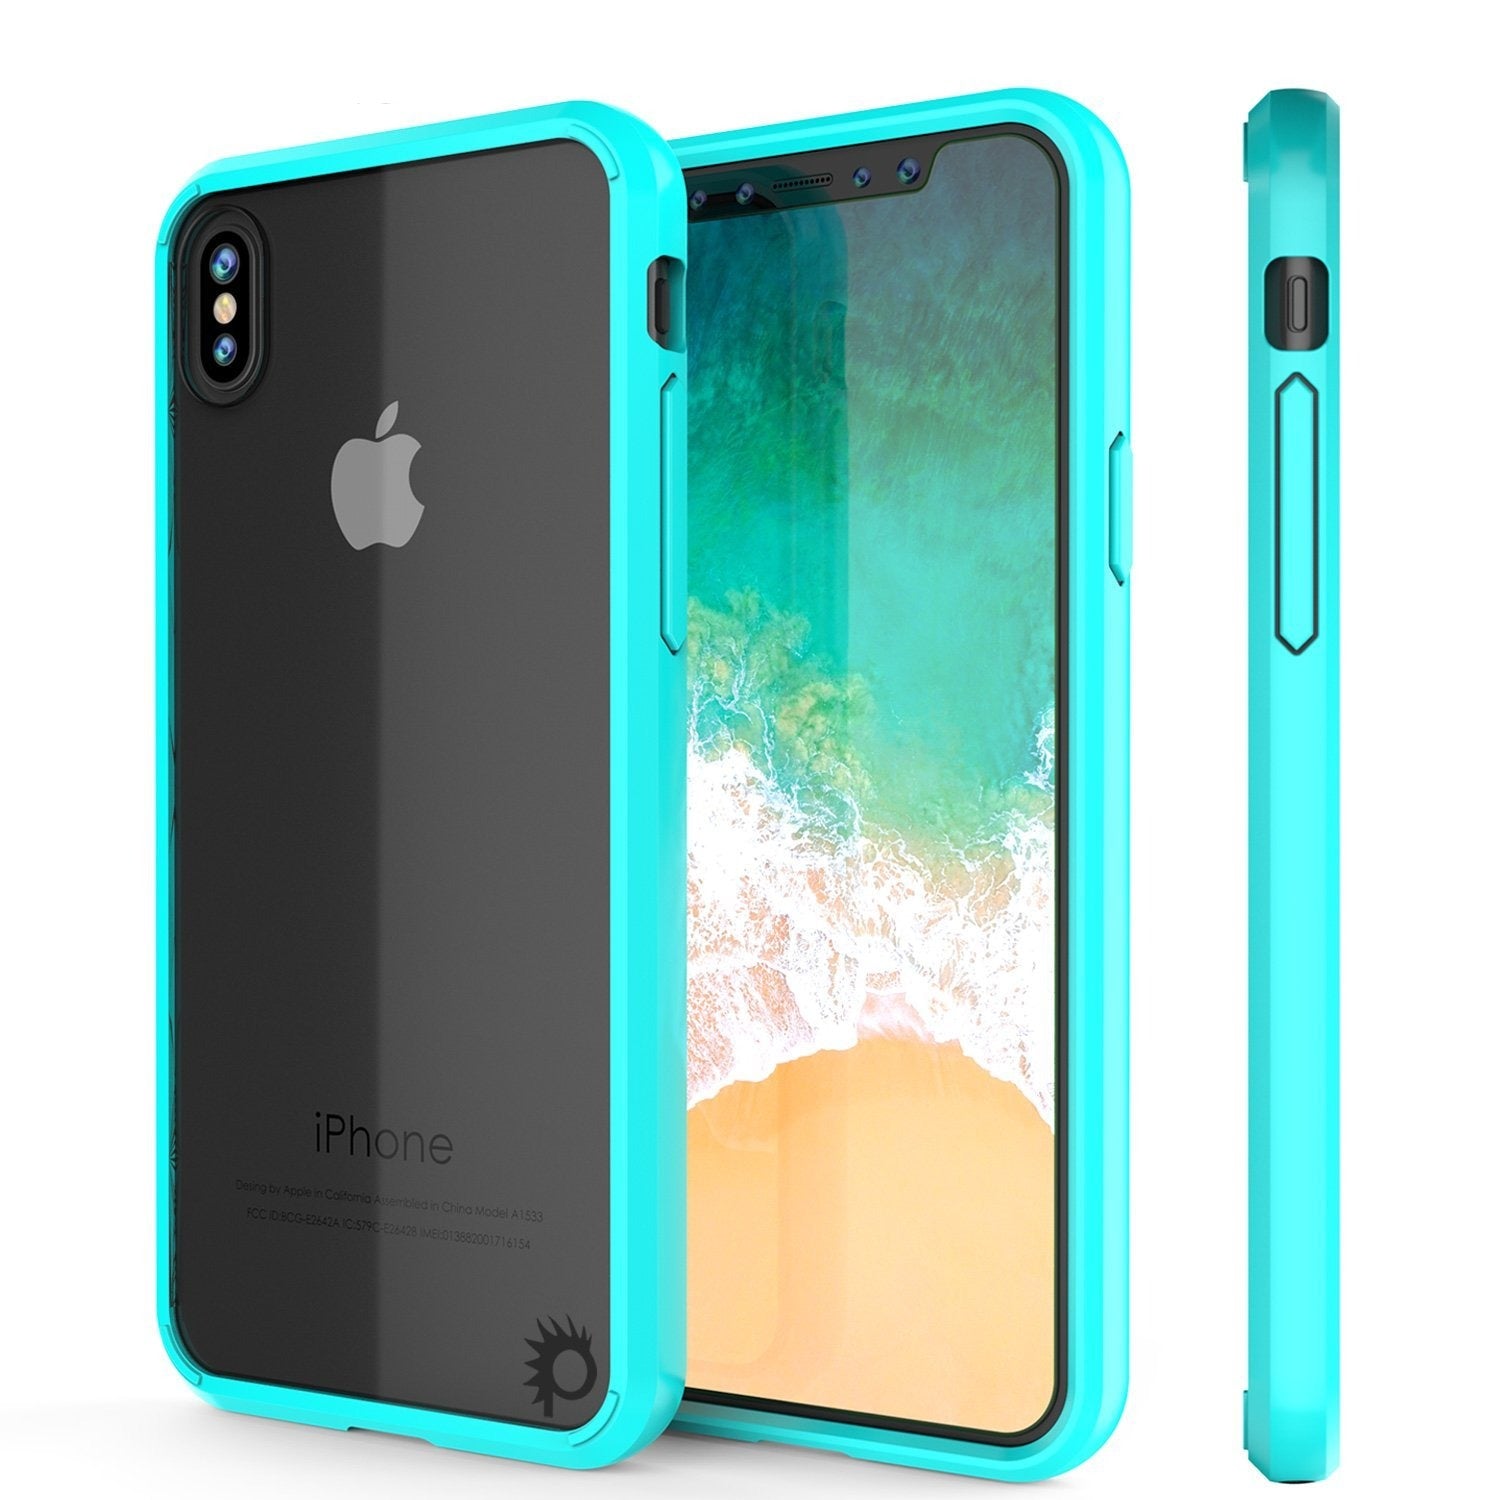 iPhone X Case, PUNKcase [LUCID 2.0 Series] [Slim Fit] Armor Cover W/Integrated Anti-Shock System [Teal]